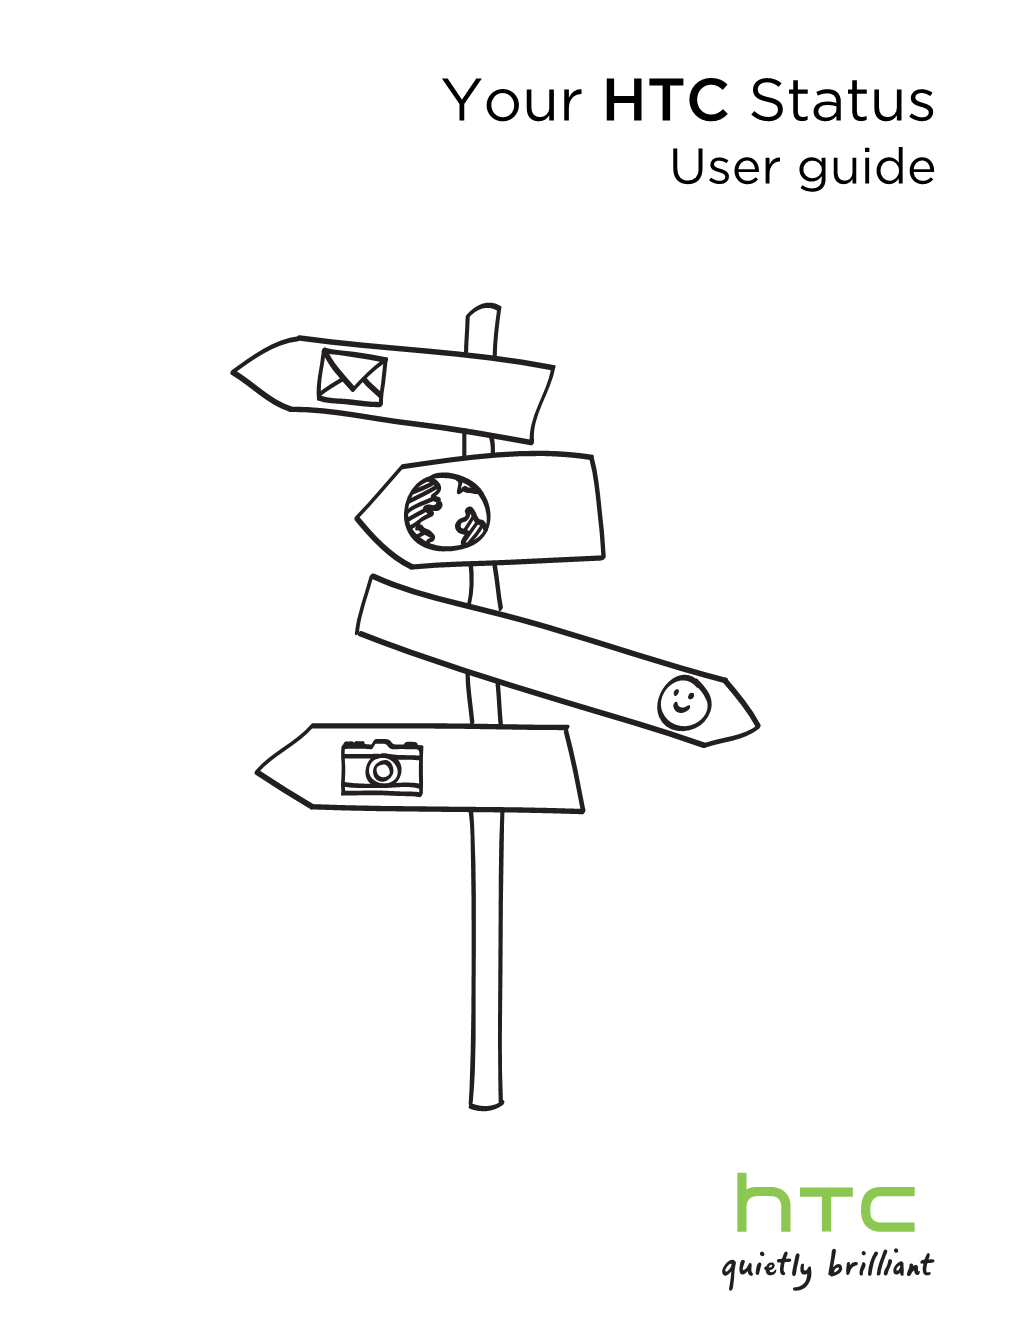 Your HTC Status User Guide 2 Contents Contents